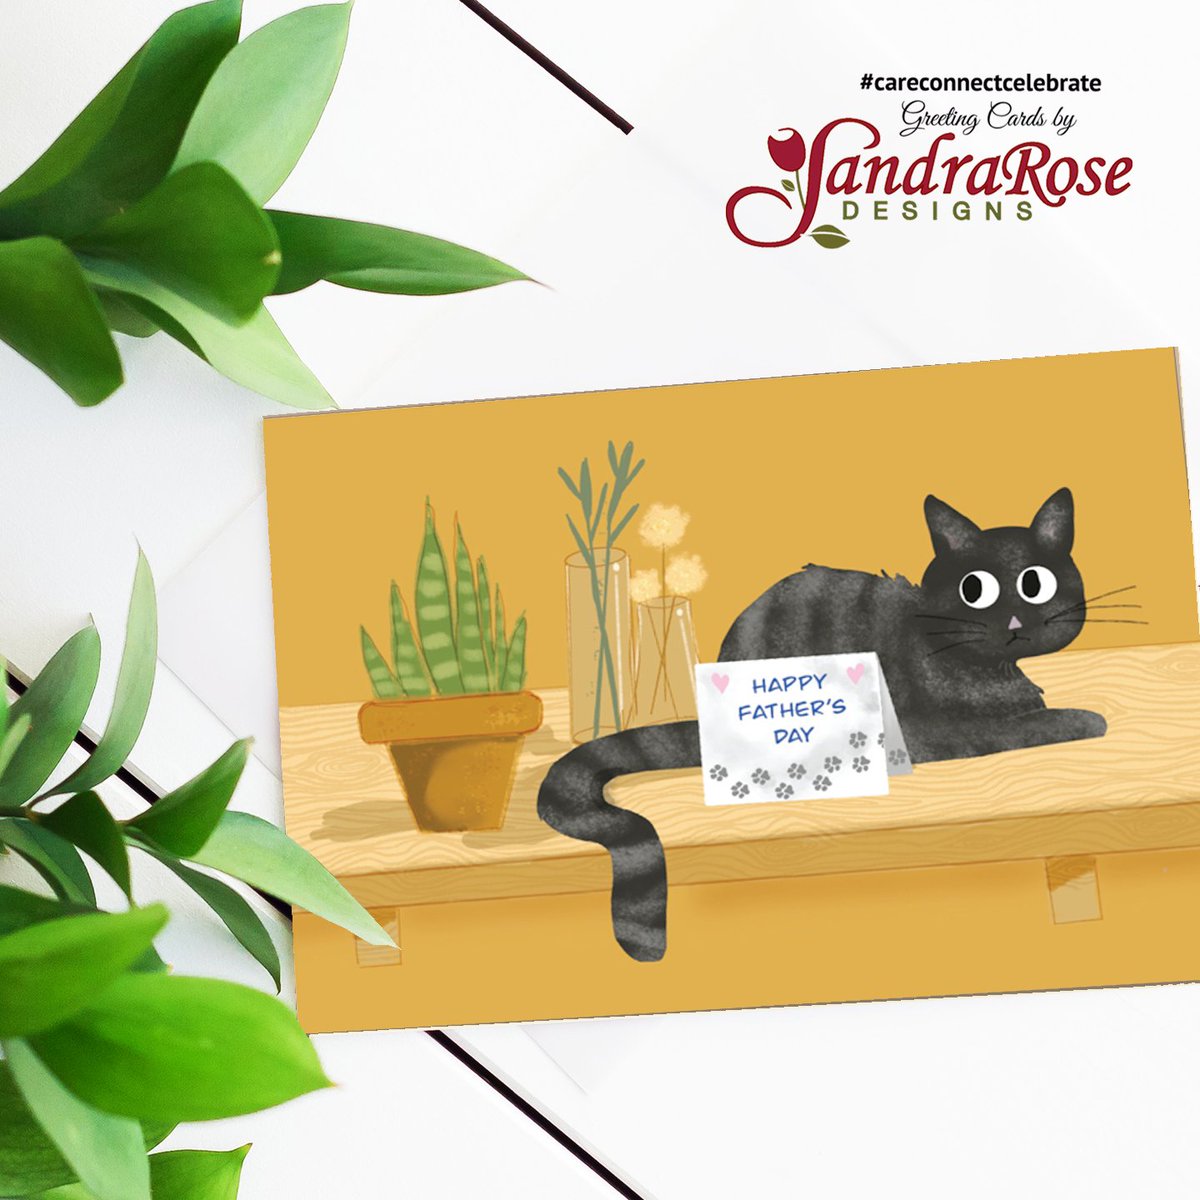 This general Father’s Day card shows a funny black and gray striped cat looking at a standing greeting card with paw prints and Happy Father’s Day written on it. #CareConnectCelebrate #SandraRoseDesigns @GCUniverse #Greetingcards #Greetingcard greetingcarduniverse.com/holiday-cards/…